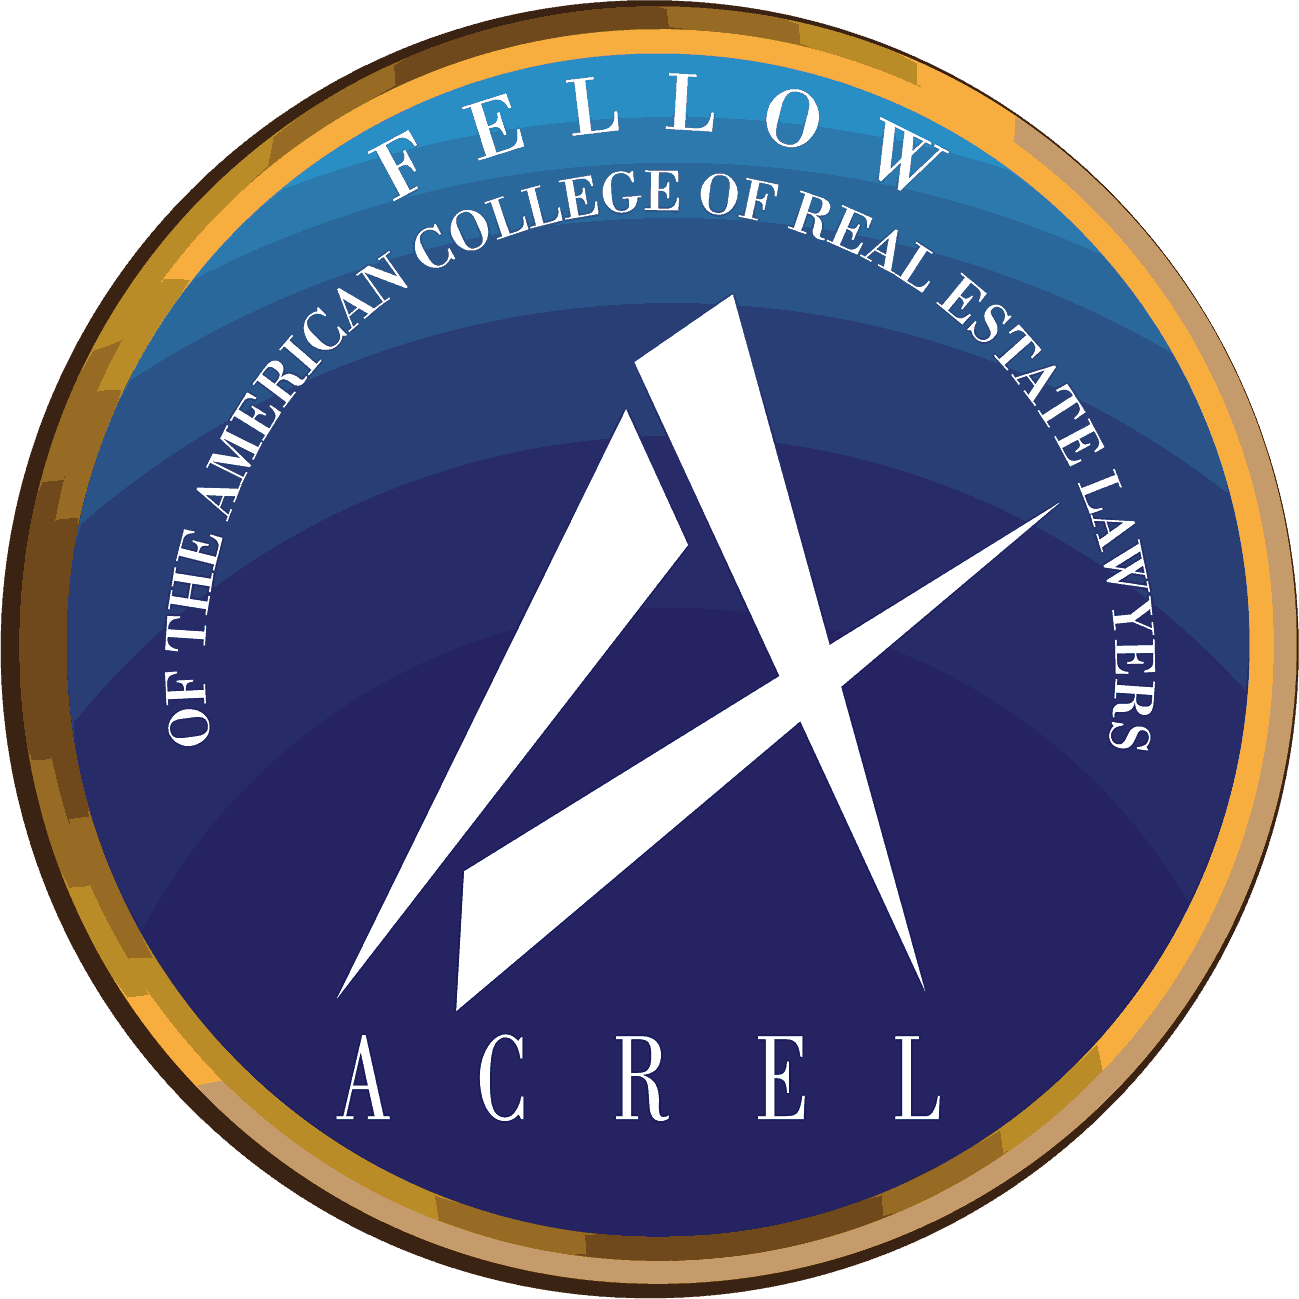 Badge for Fellows of the American College of Real Estate Lawyers (ACREL). The badge has a gradient blue background with a large white letter 'A' in the center. The words 'Fellow of the American College of Real Estate Lawyers' are written in white around t